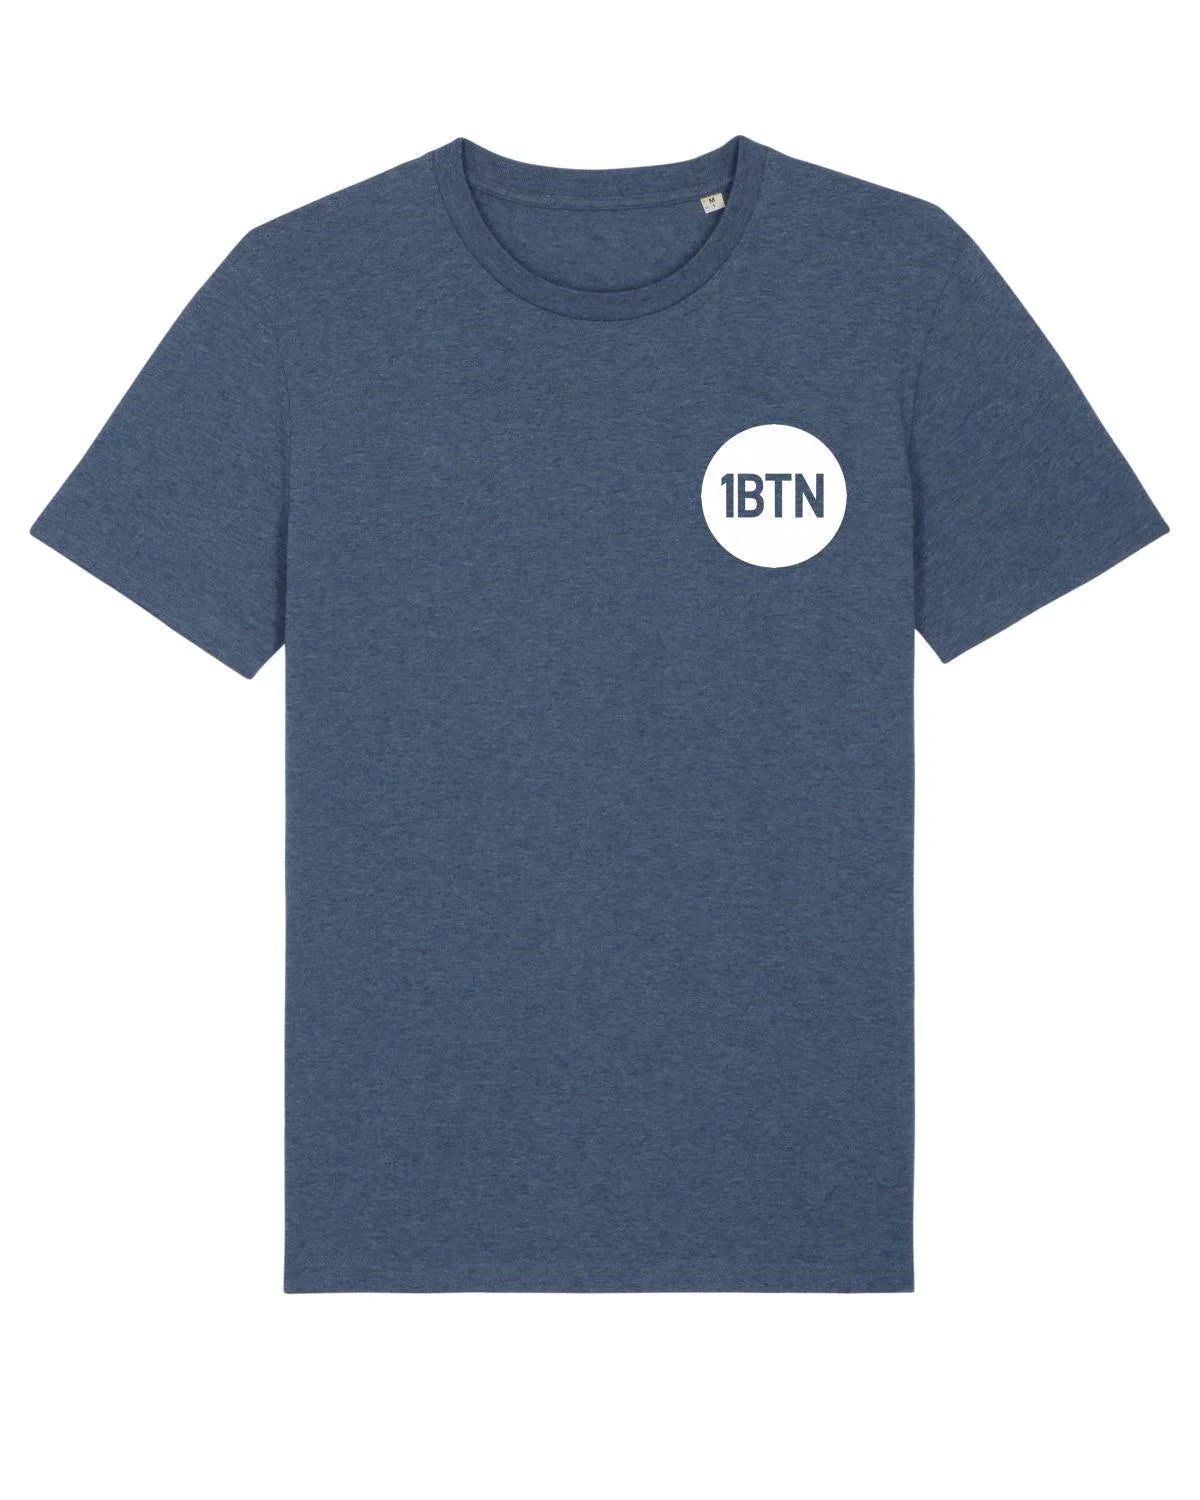 1BTN SWIRL By Mitchy Bwoy: 2 Sided T-Shirt Official Merchandise of 1BTN.FM (5 Colour Options) - SOUND IS COLOUR